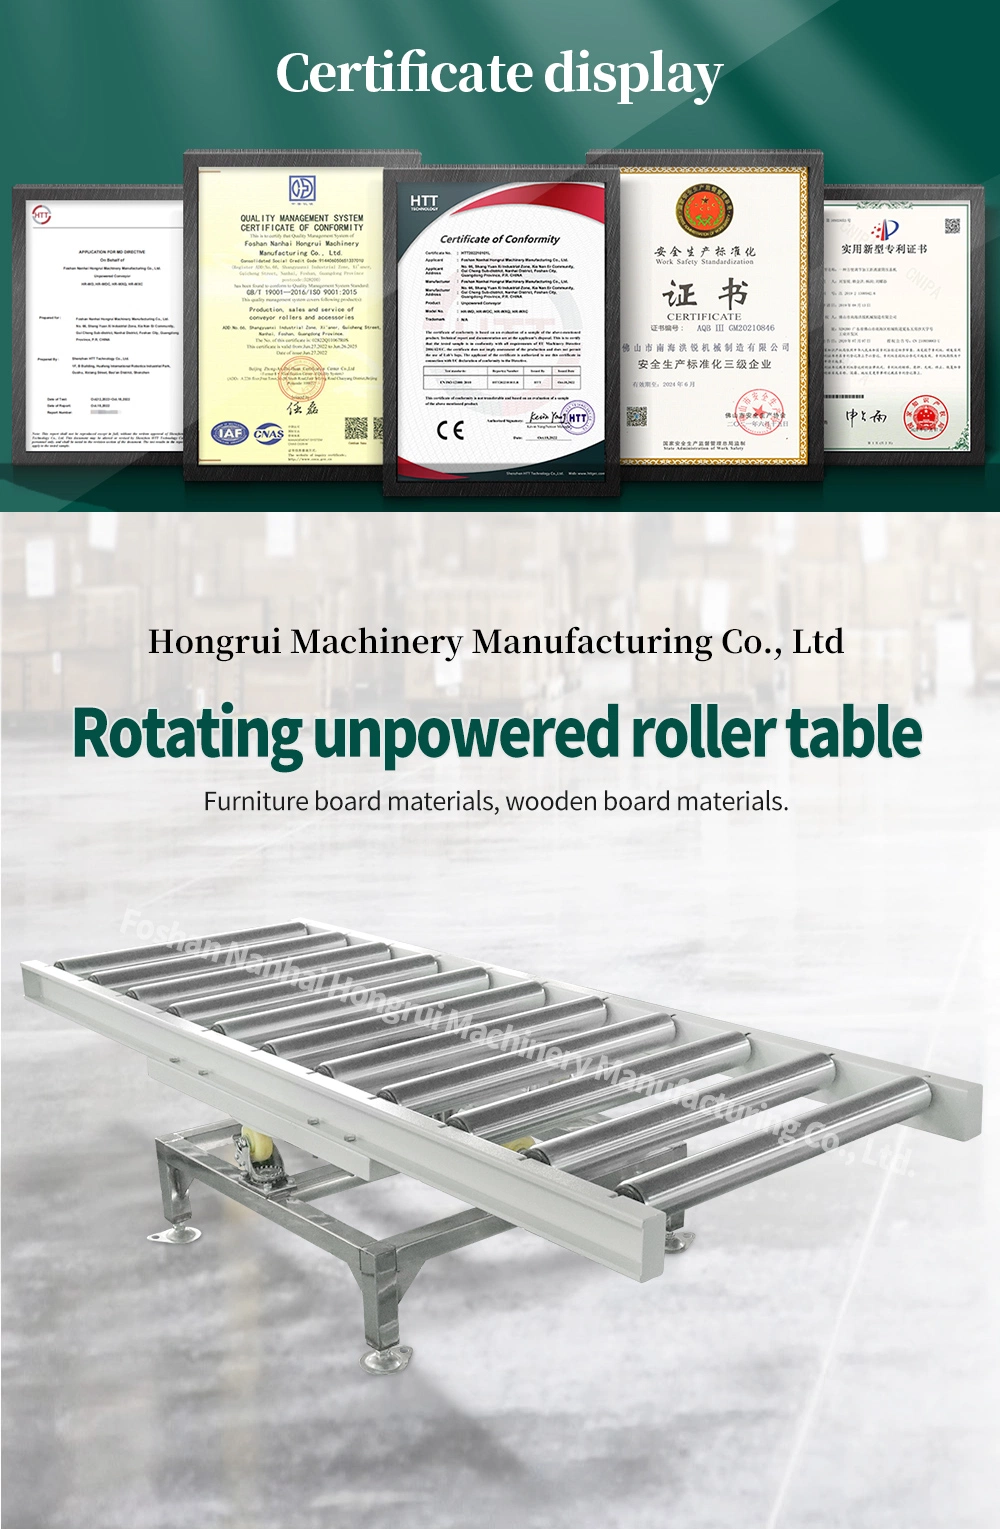 Gravity-Powered Revolving Roller Table for Easy Item Handling - No Electricity Needed